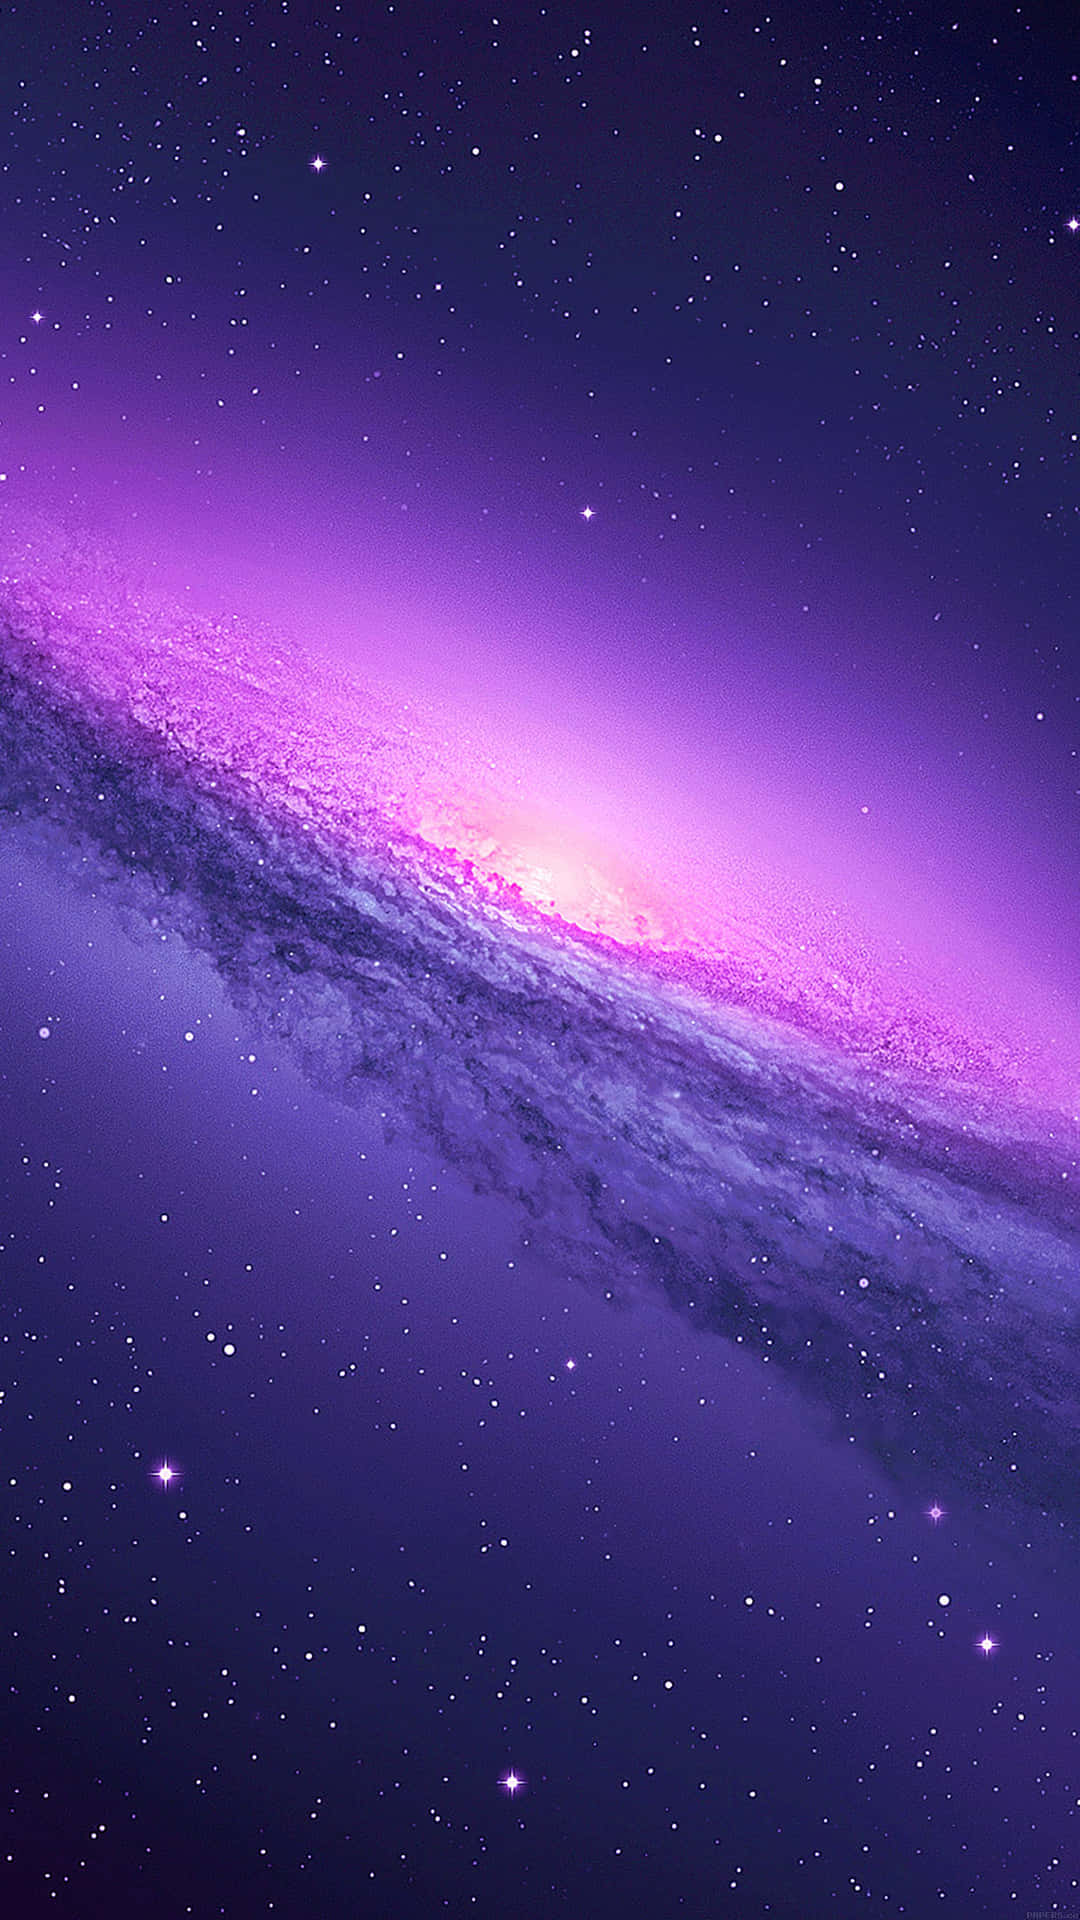 Witness the majesty of the Blue Galaxy with the new iPhone Wallpaper